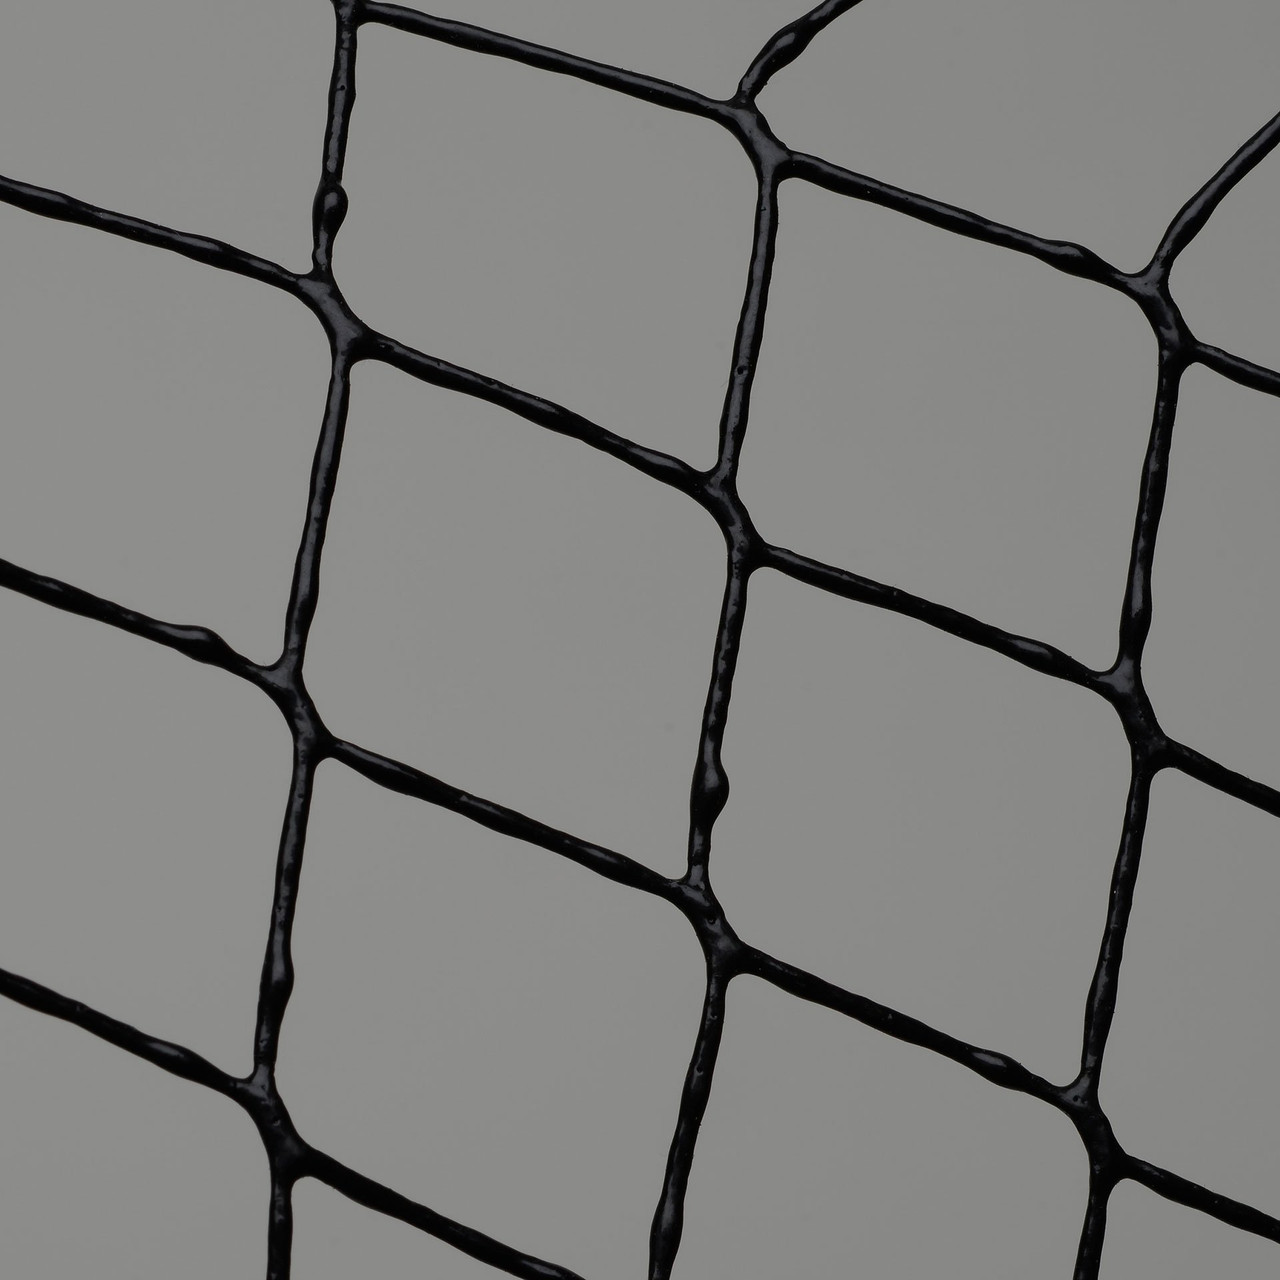 Fixed Handle Nets Archives - Beckman Fishing Nets